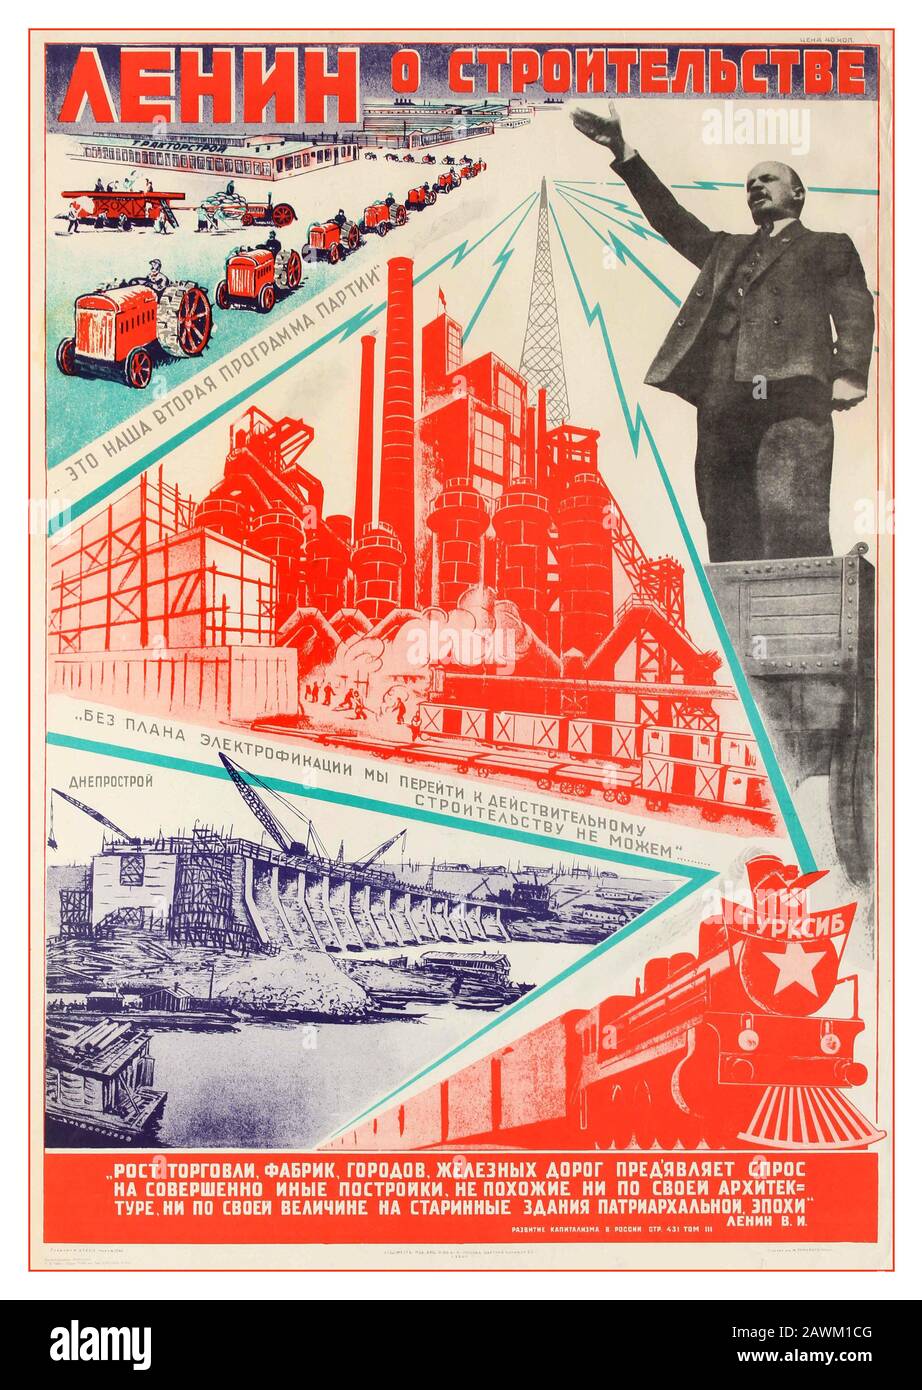 Official LENIN Soviet USSR vintage 1930 poster Constructivist propaganda poster - ‘Lenin on Construction’. Featuring Lenin on a raised podium, with a variety of USSR communist industrial construction and productivity scenes Russia USSR Stock Photo